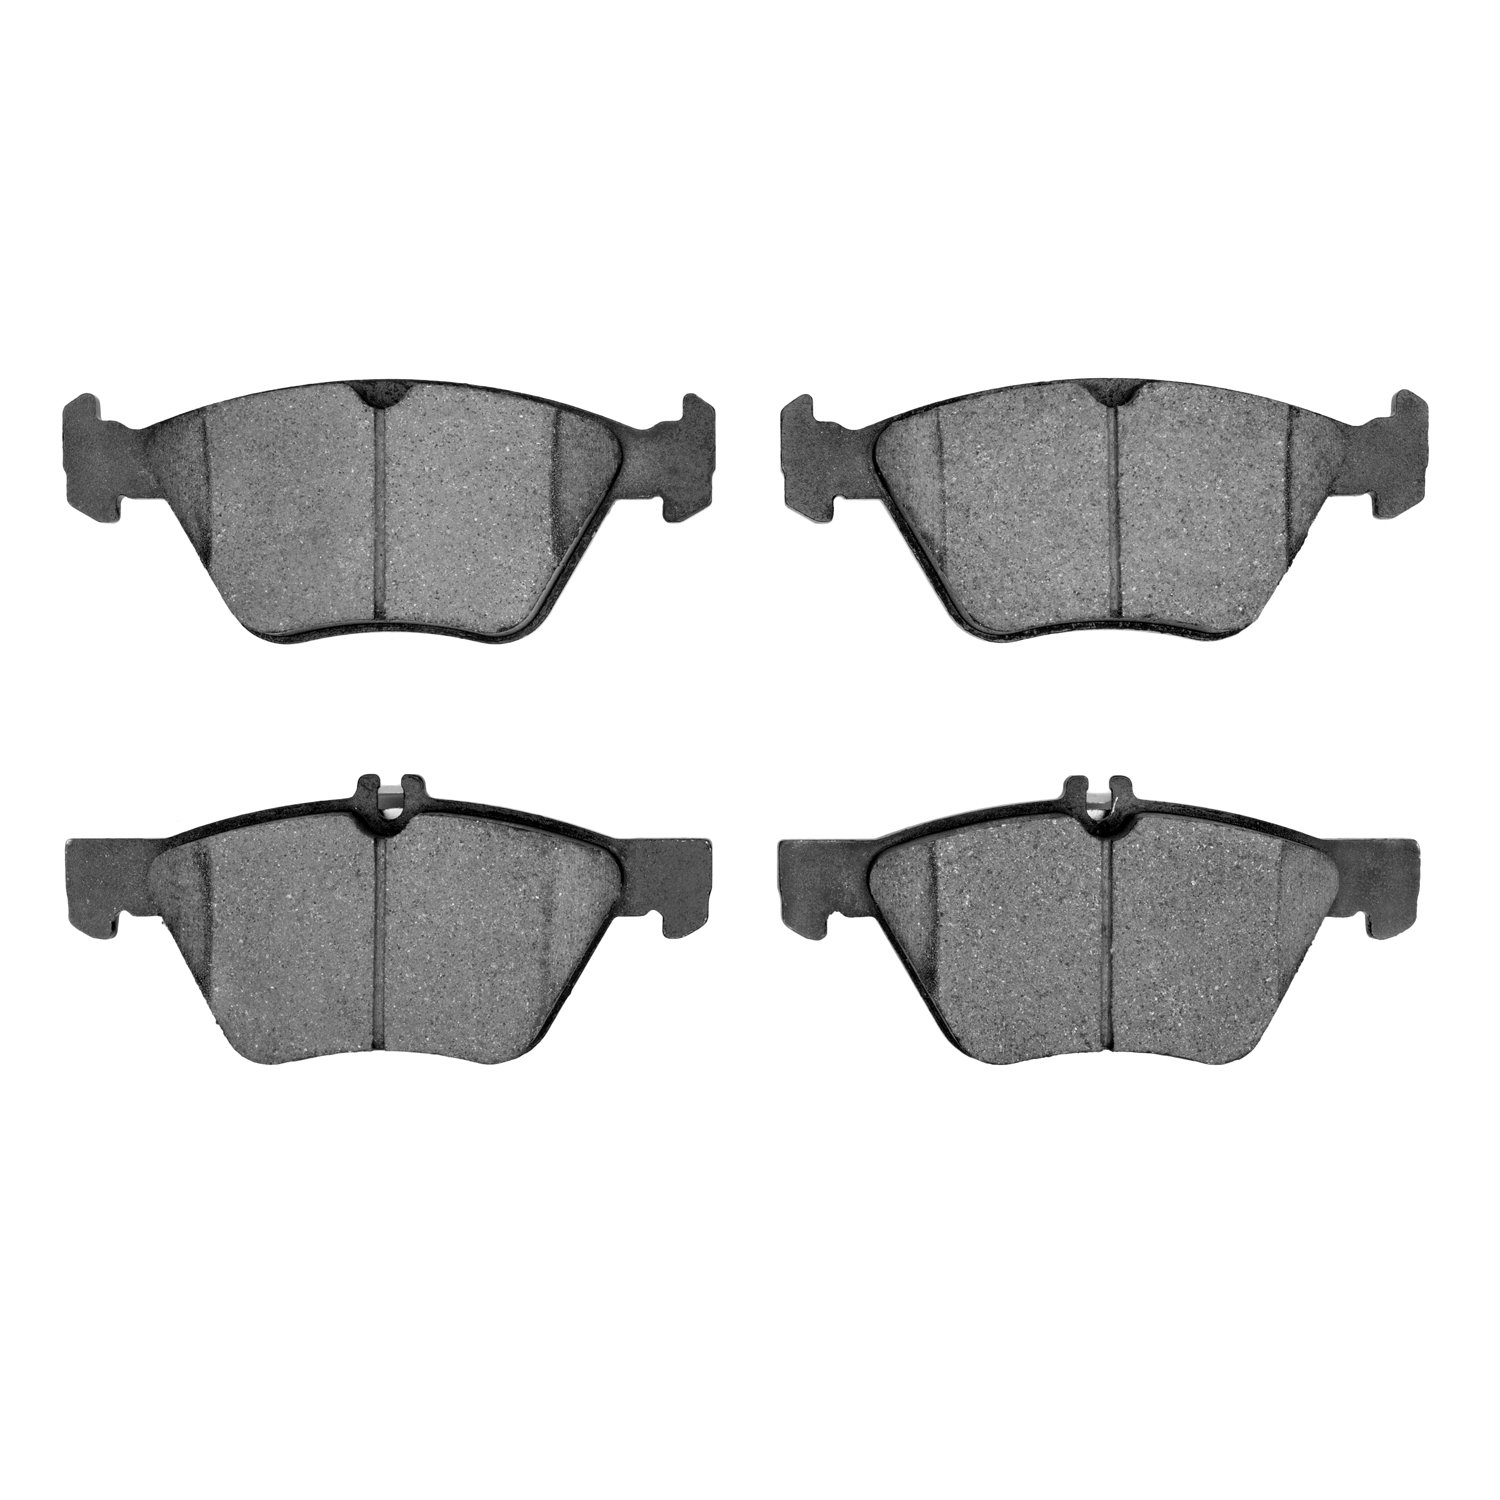 1551-0740-00 5000 Advanced Low-Metallic Brake Pads, 1996-2008 Multiple Makes/Models, Position: Front